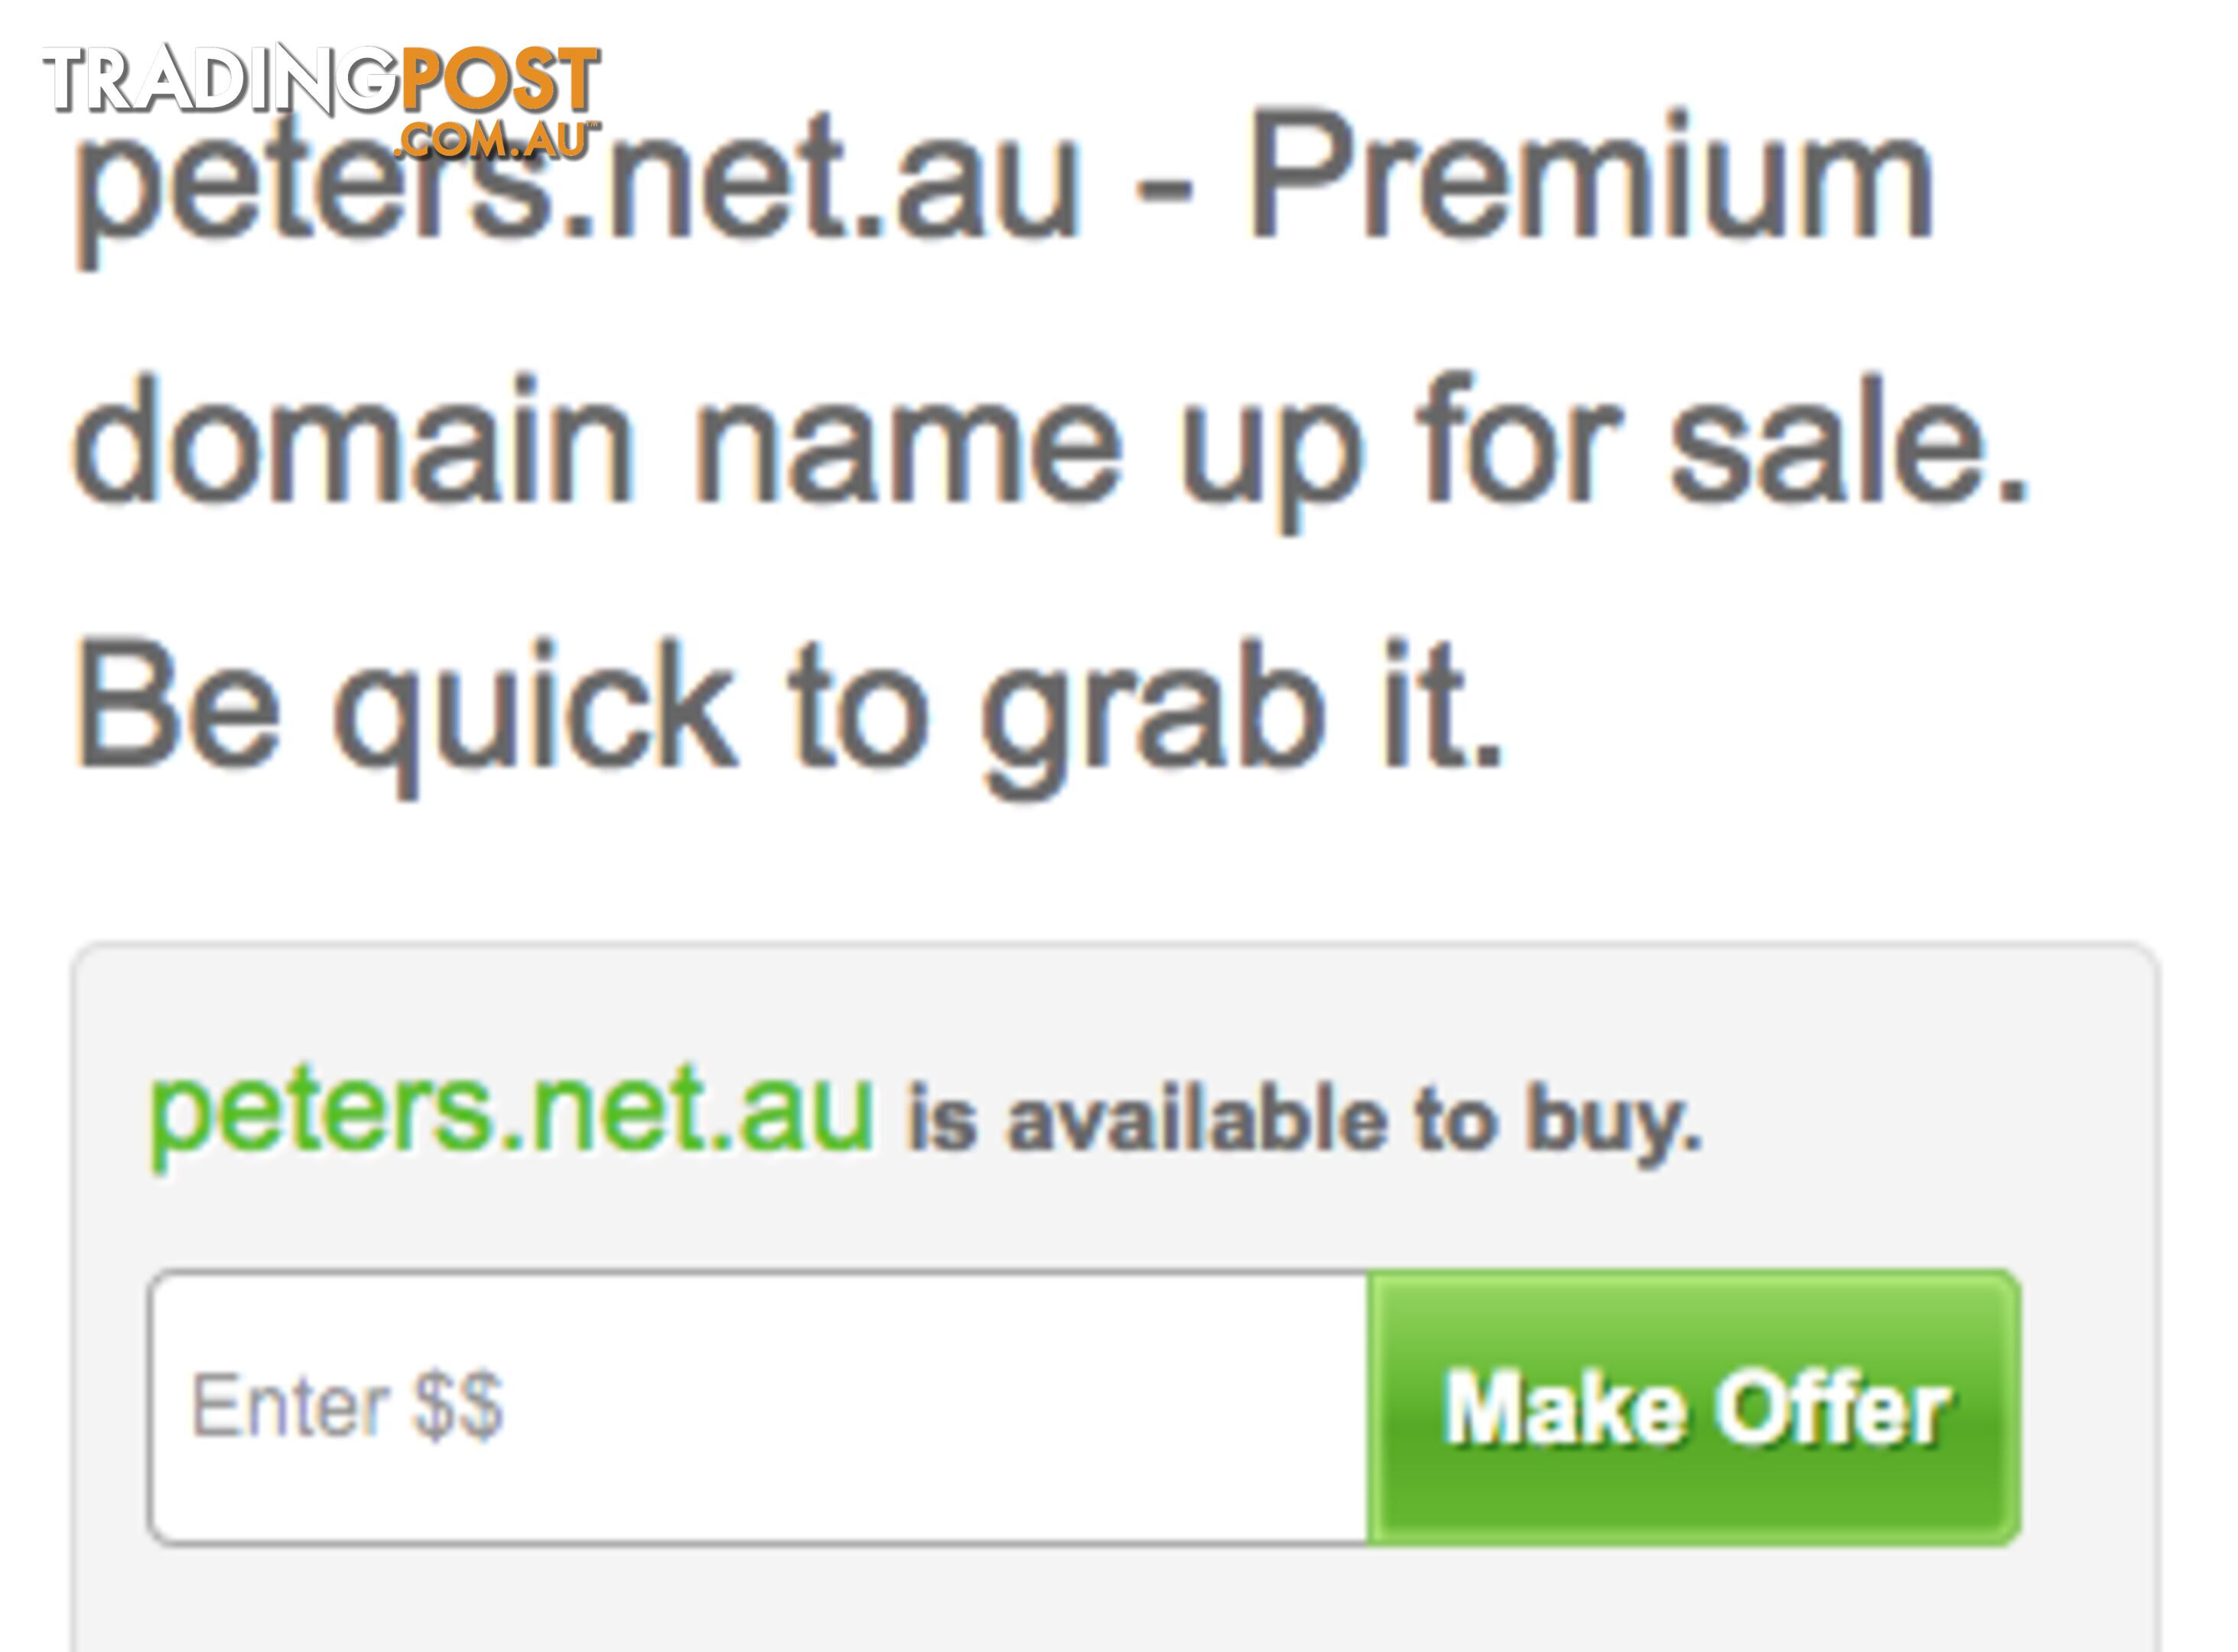 Peters.net.au - Premium domain name up for sale.